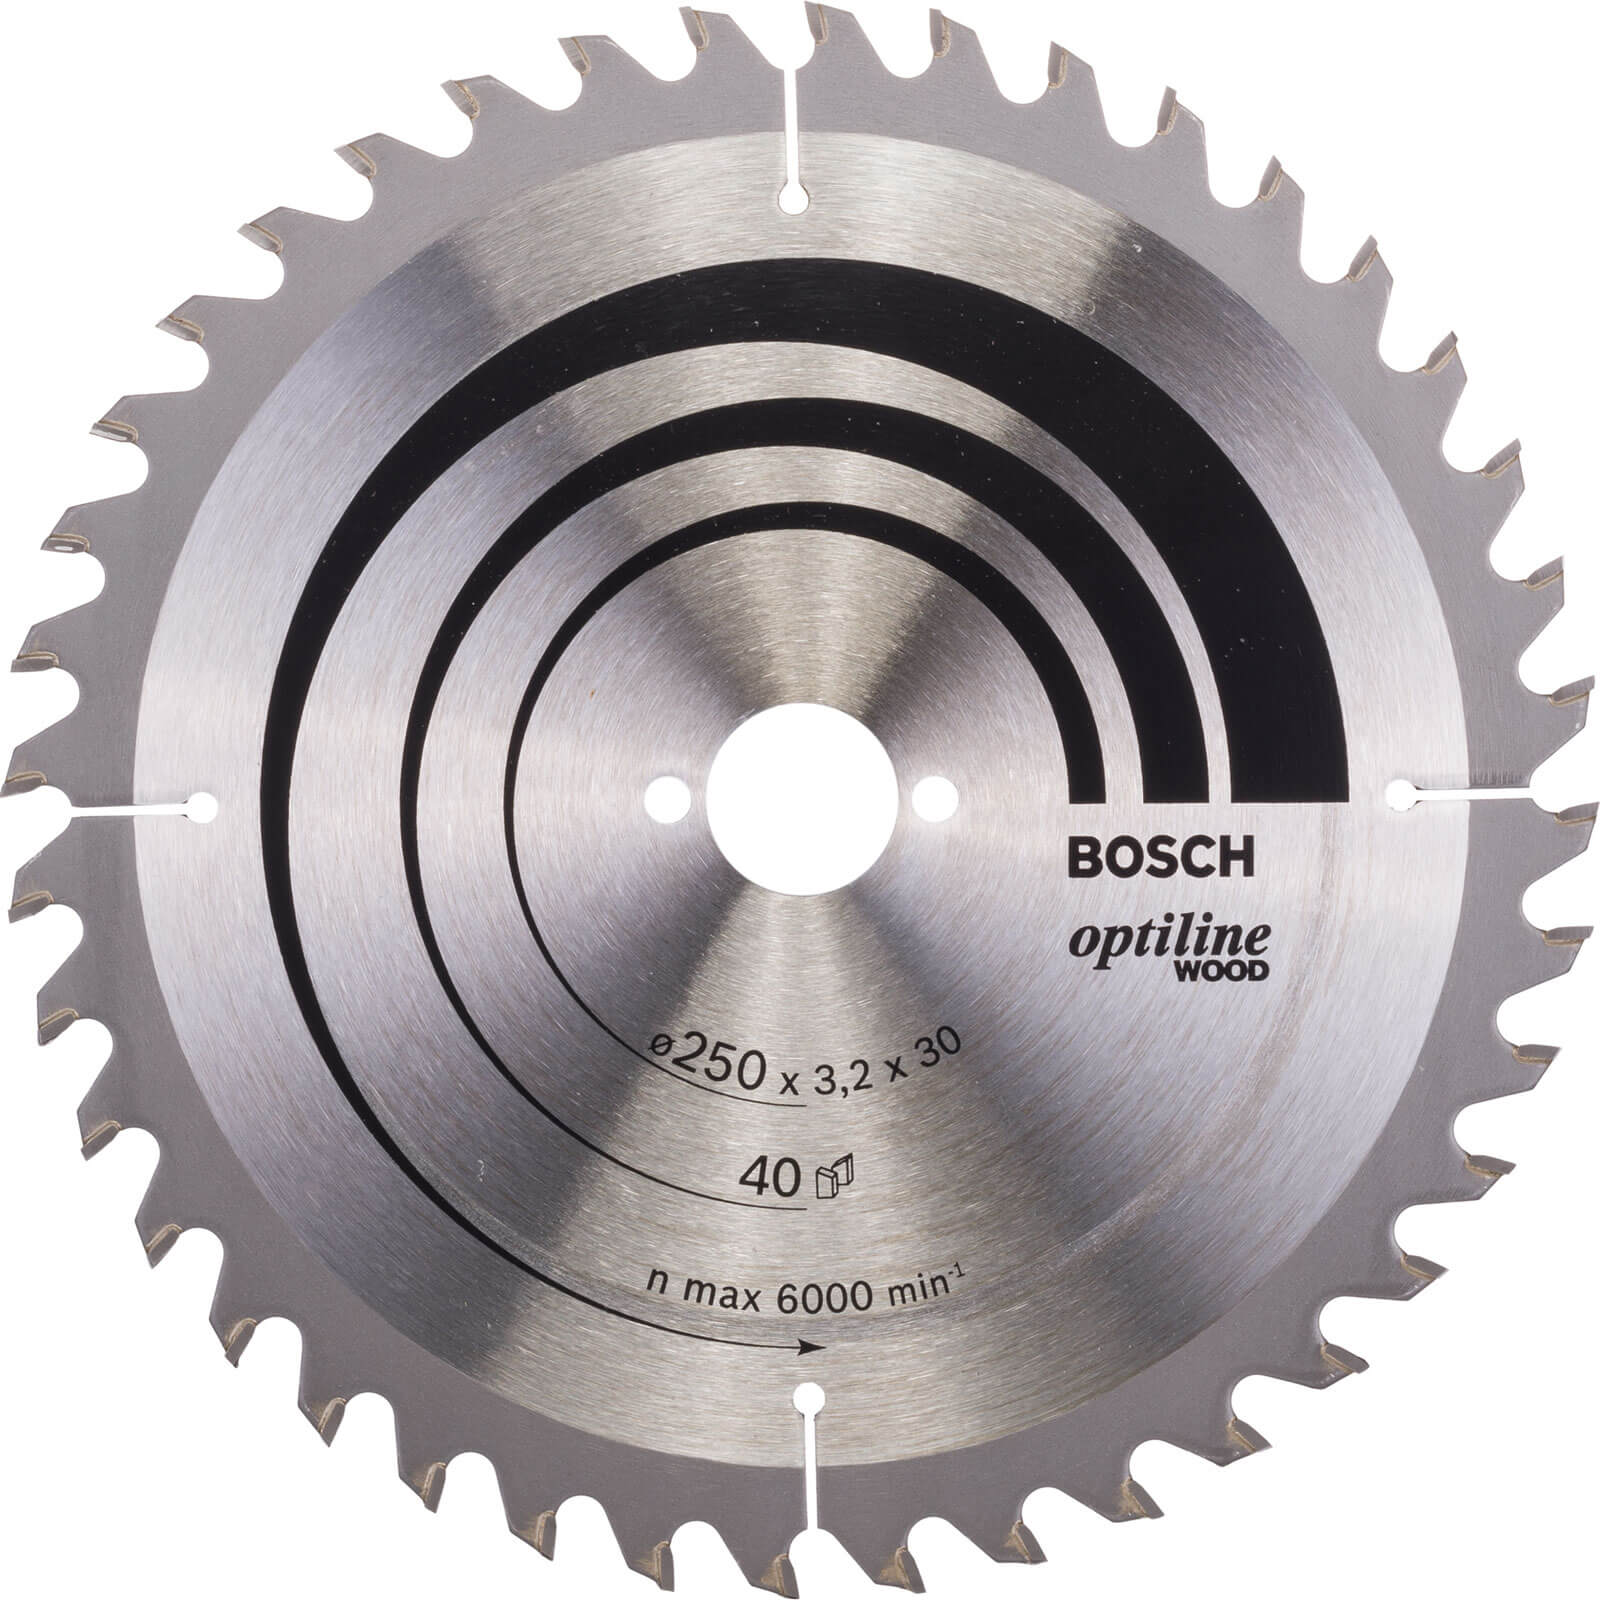 Photo of Bosch Optiline Wood Cutting Table Saw Blade 250mm 40t 30mm